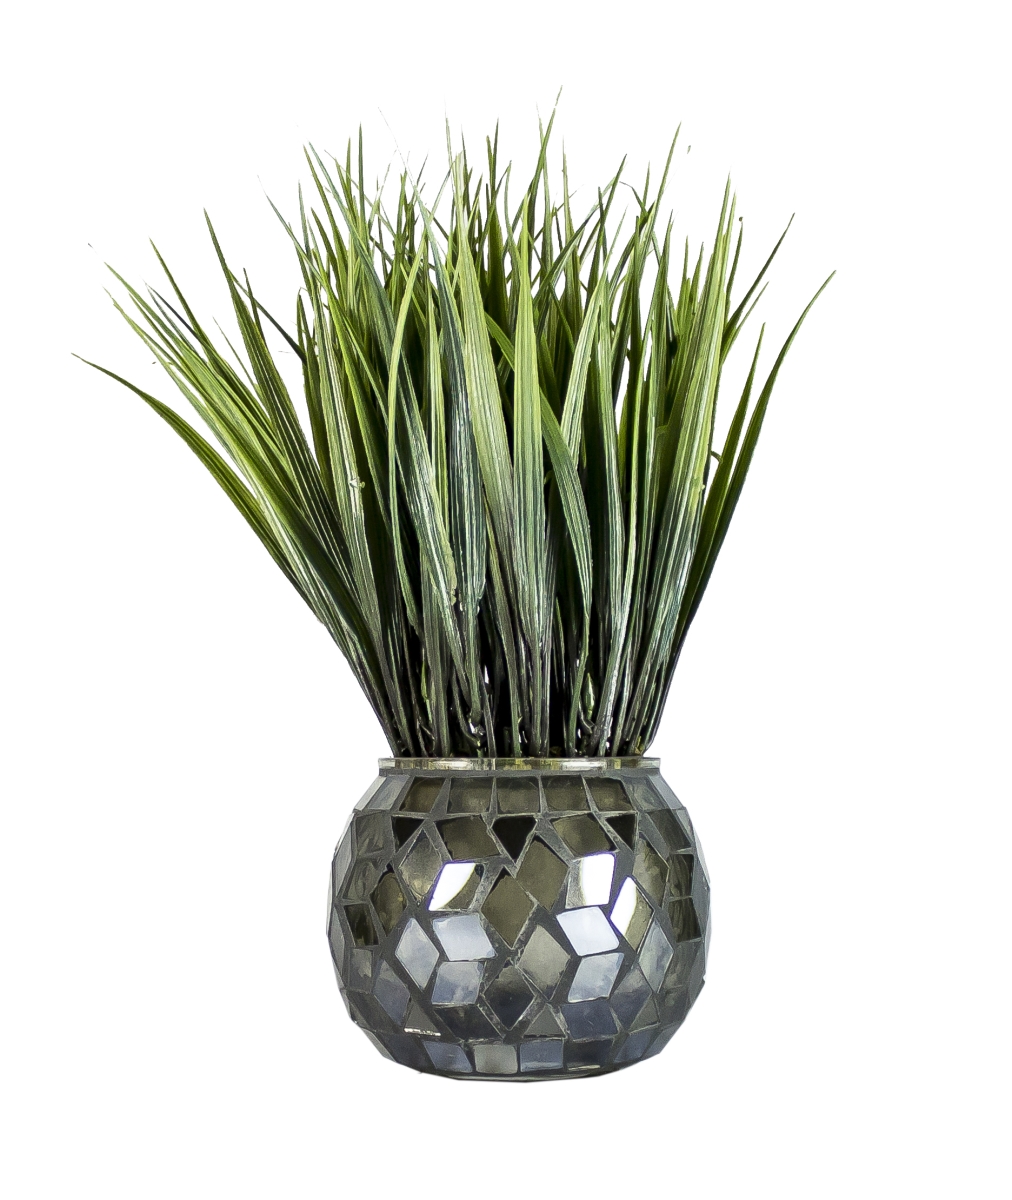 Vha102428.2pack 11.75 In. Tall Grass In Mosaic Container, Navy & Silver - Pack Of 2